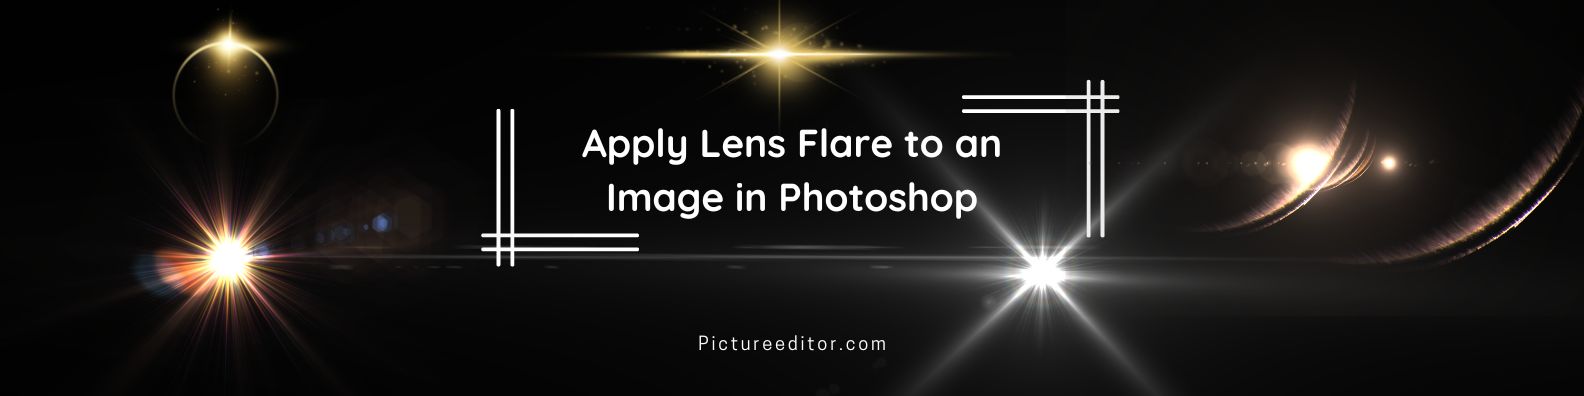 Apply Lens Flare to an Image in Photoshop